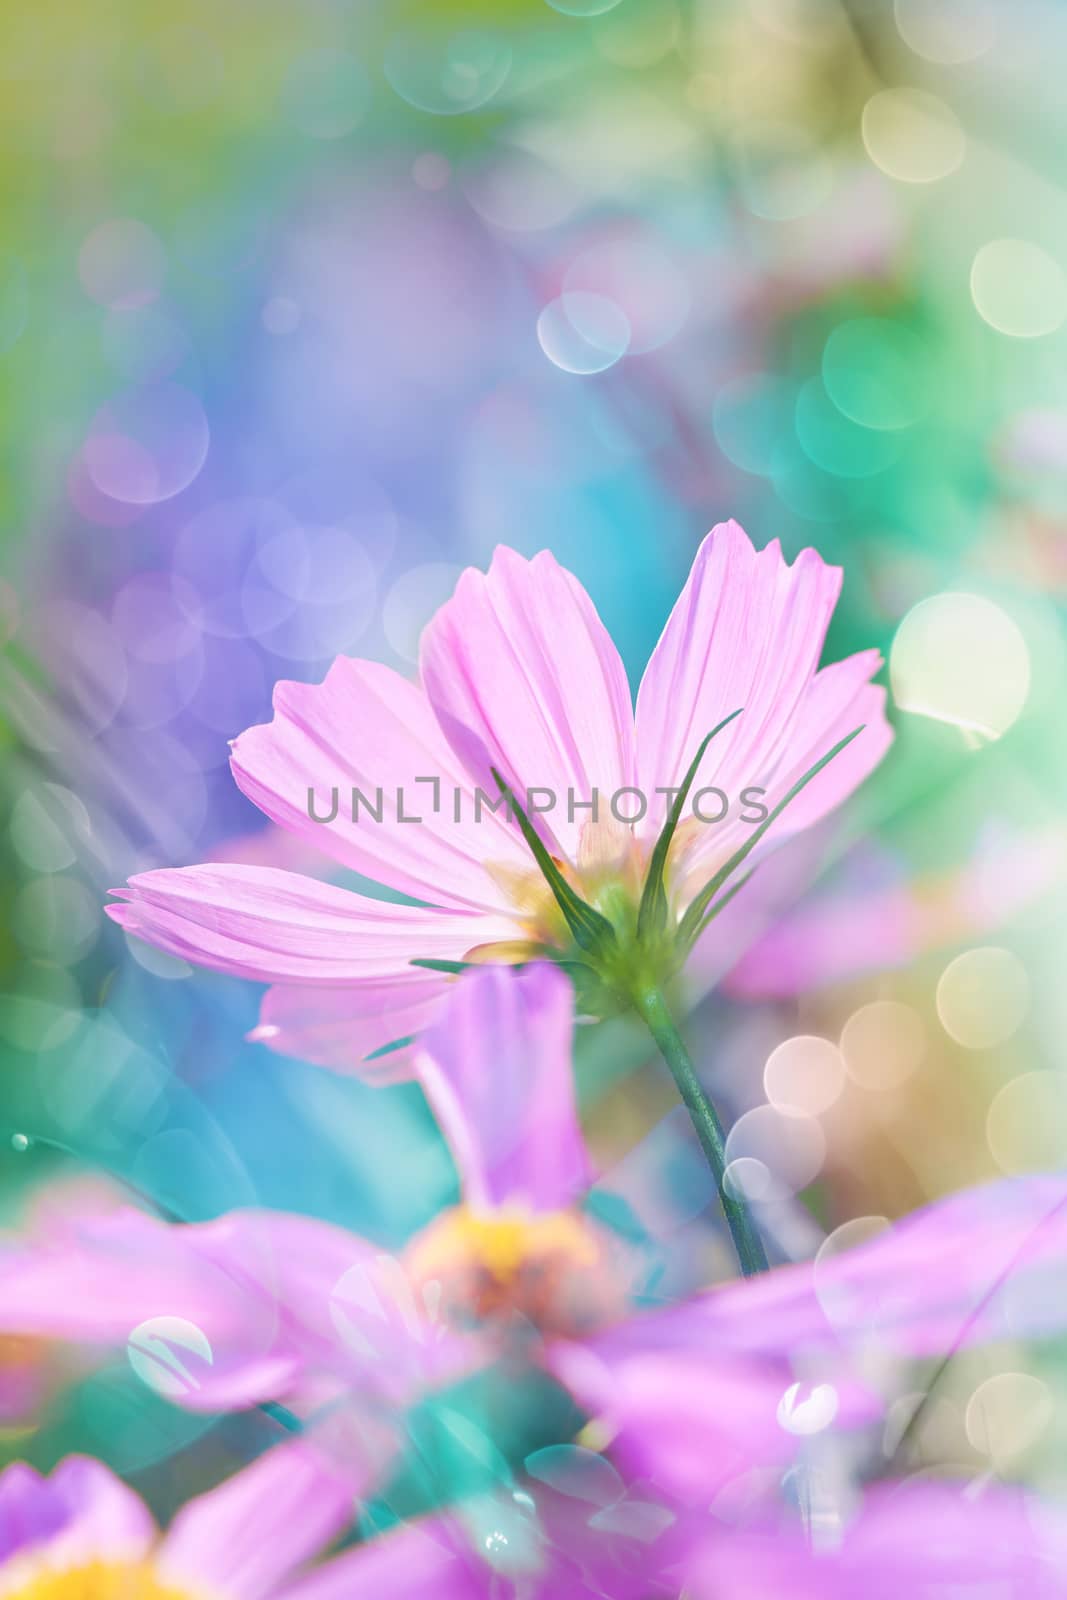 Closeup pink cosmos flowers blooming in the garden at the day time on blurred nature background. Beautiful natural floral use as background. Shallow depth of field (dof), selective focus. Outdoors.